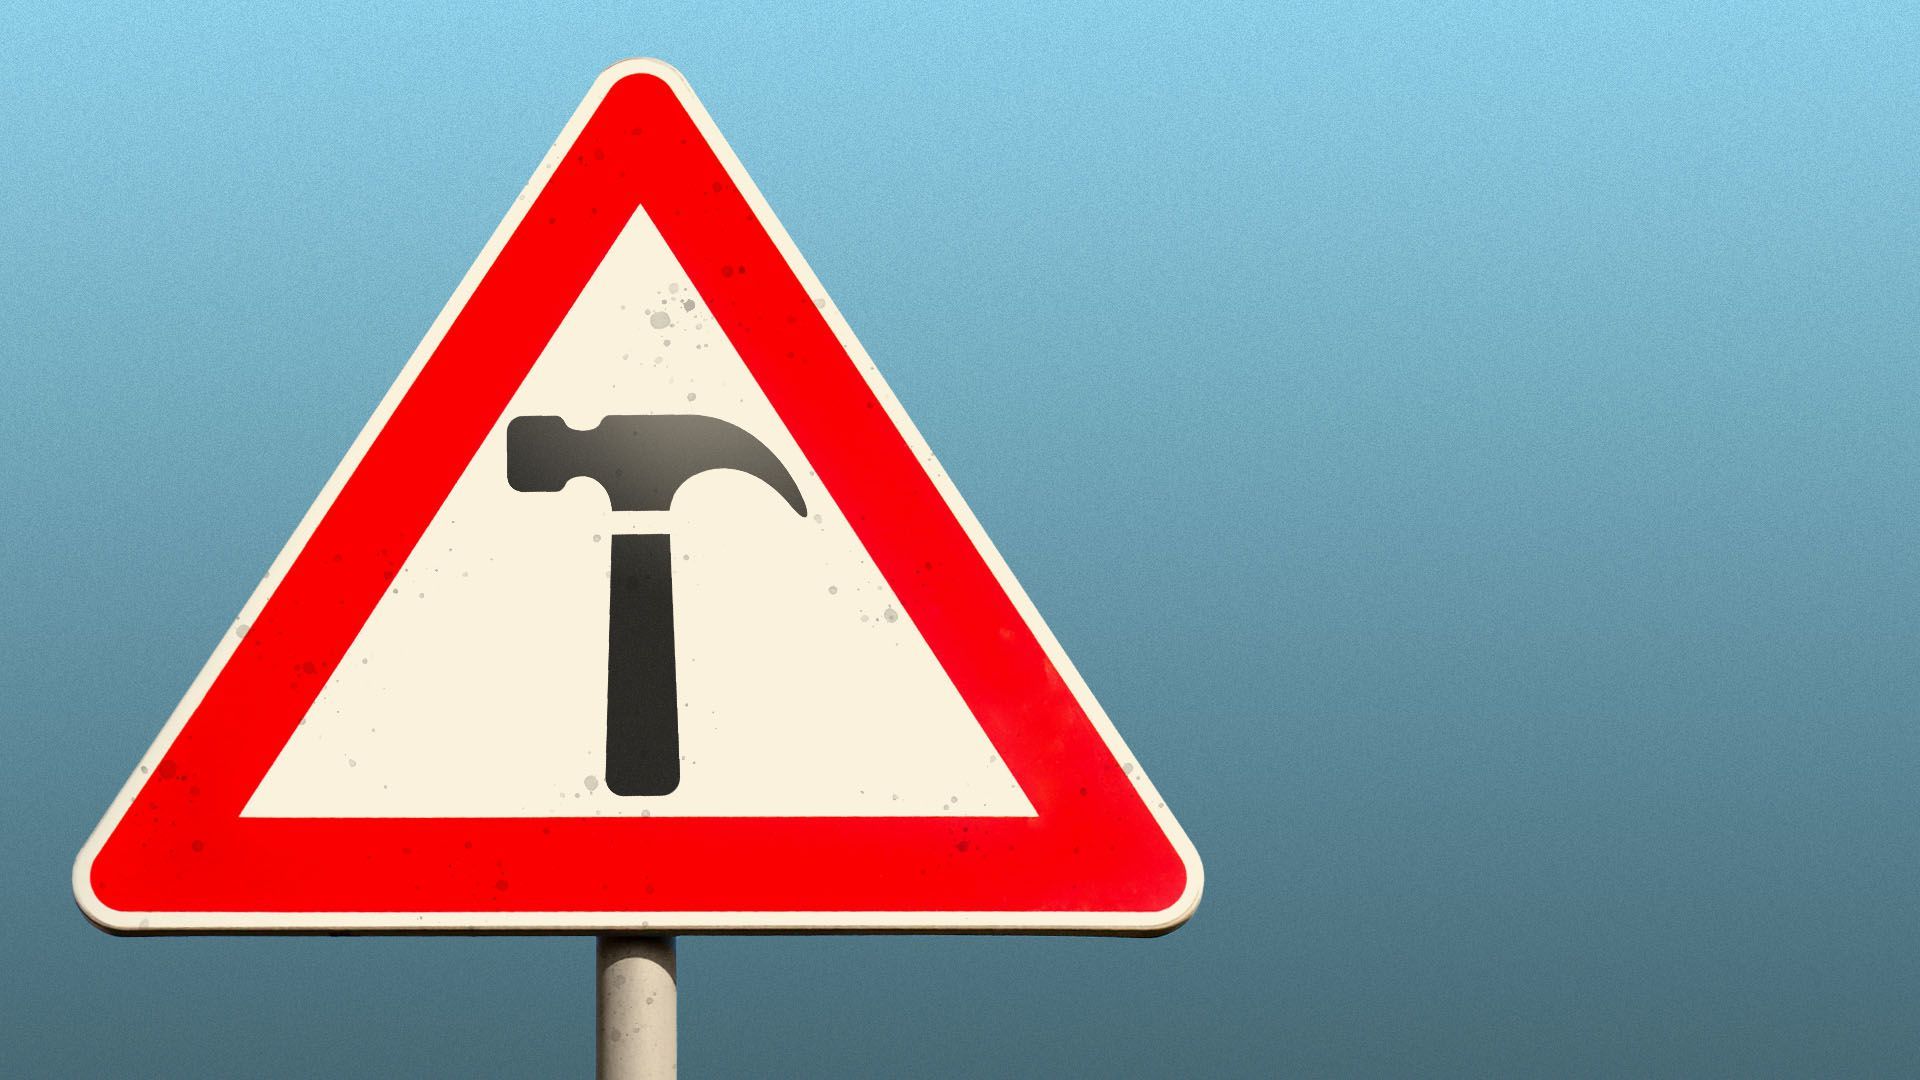 Illustration of a warning sign with hammer instead of an exclamation point